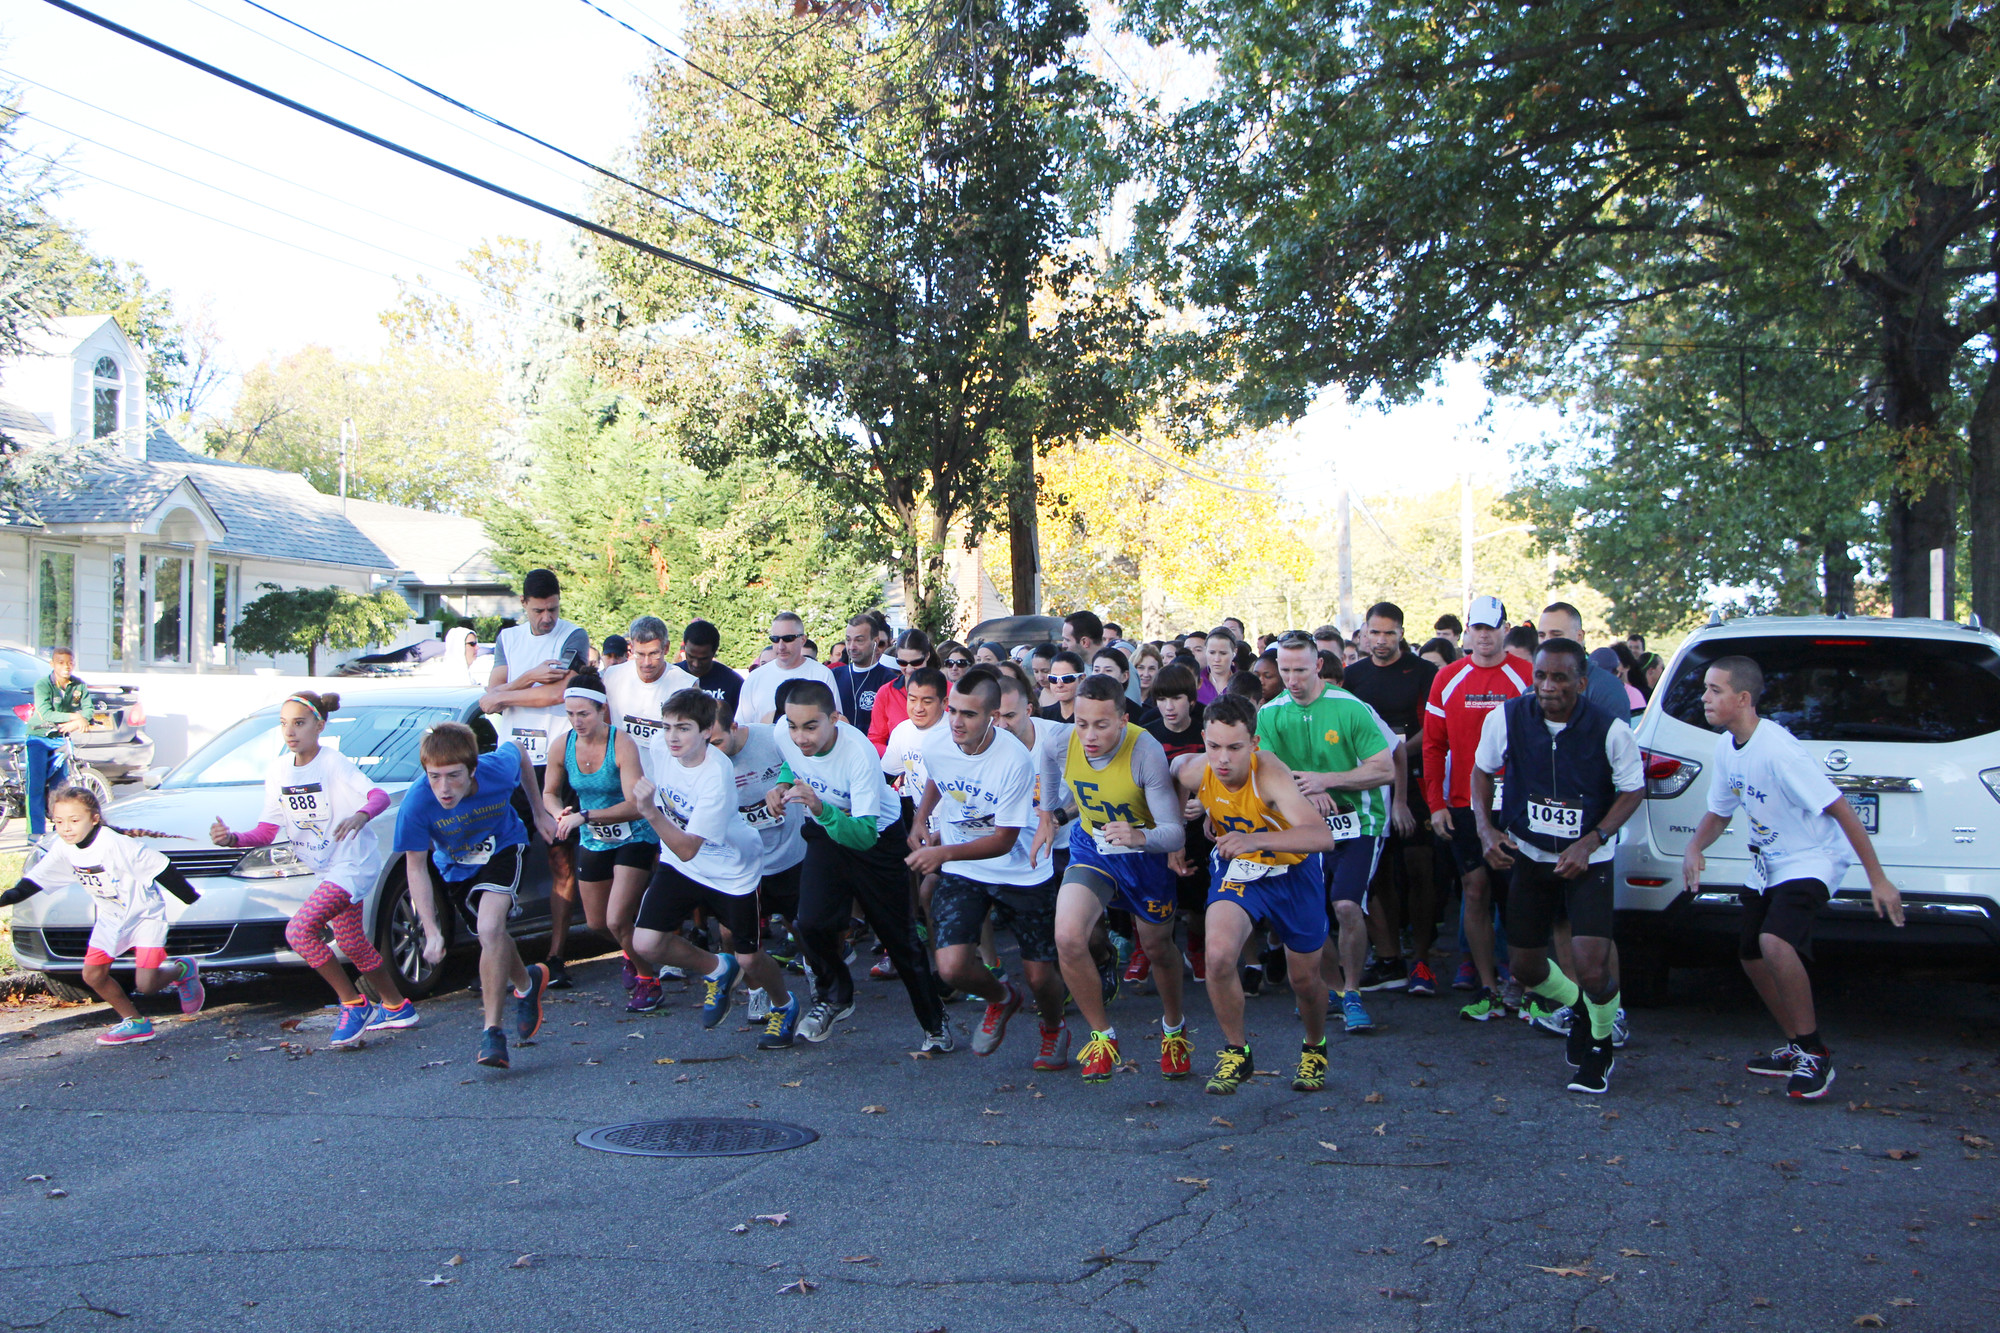 About 300 racers kicked off the second annual McVey 5K last Sunday at McVey Elementary School on Devon Street.